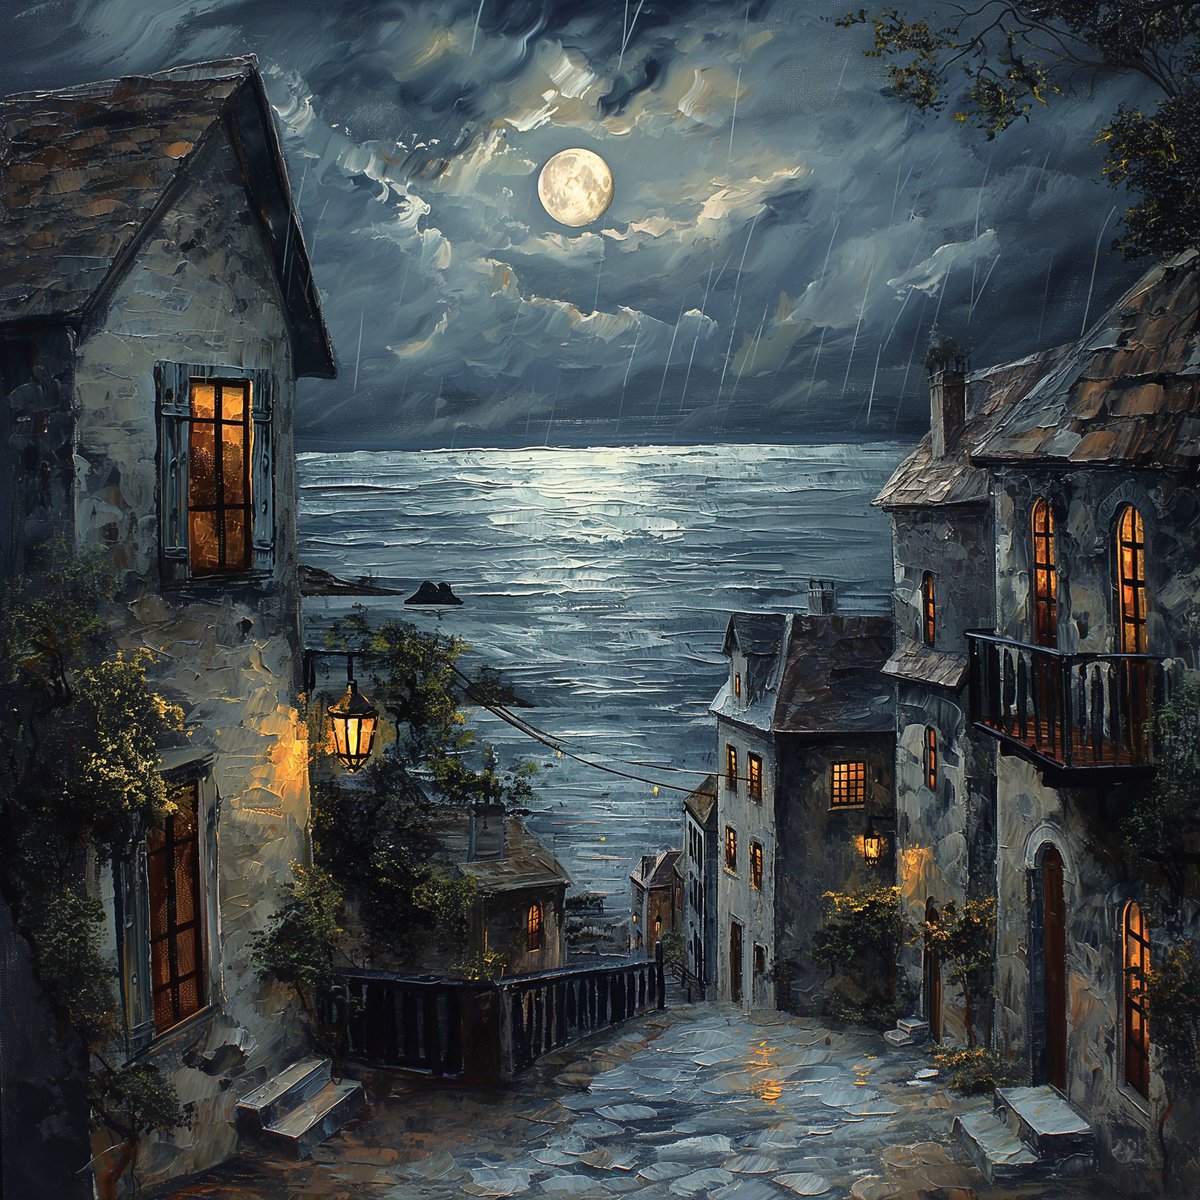 Coastal town Moonlight kisses waves, Silent streets embrace the shore, Whispers of tides’ love. #aiart, #aiartcommunity, #AIArtworks,